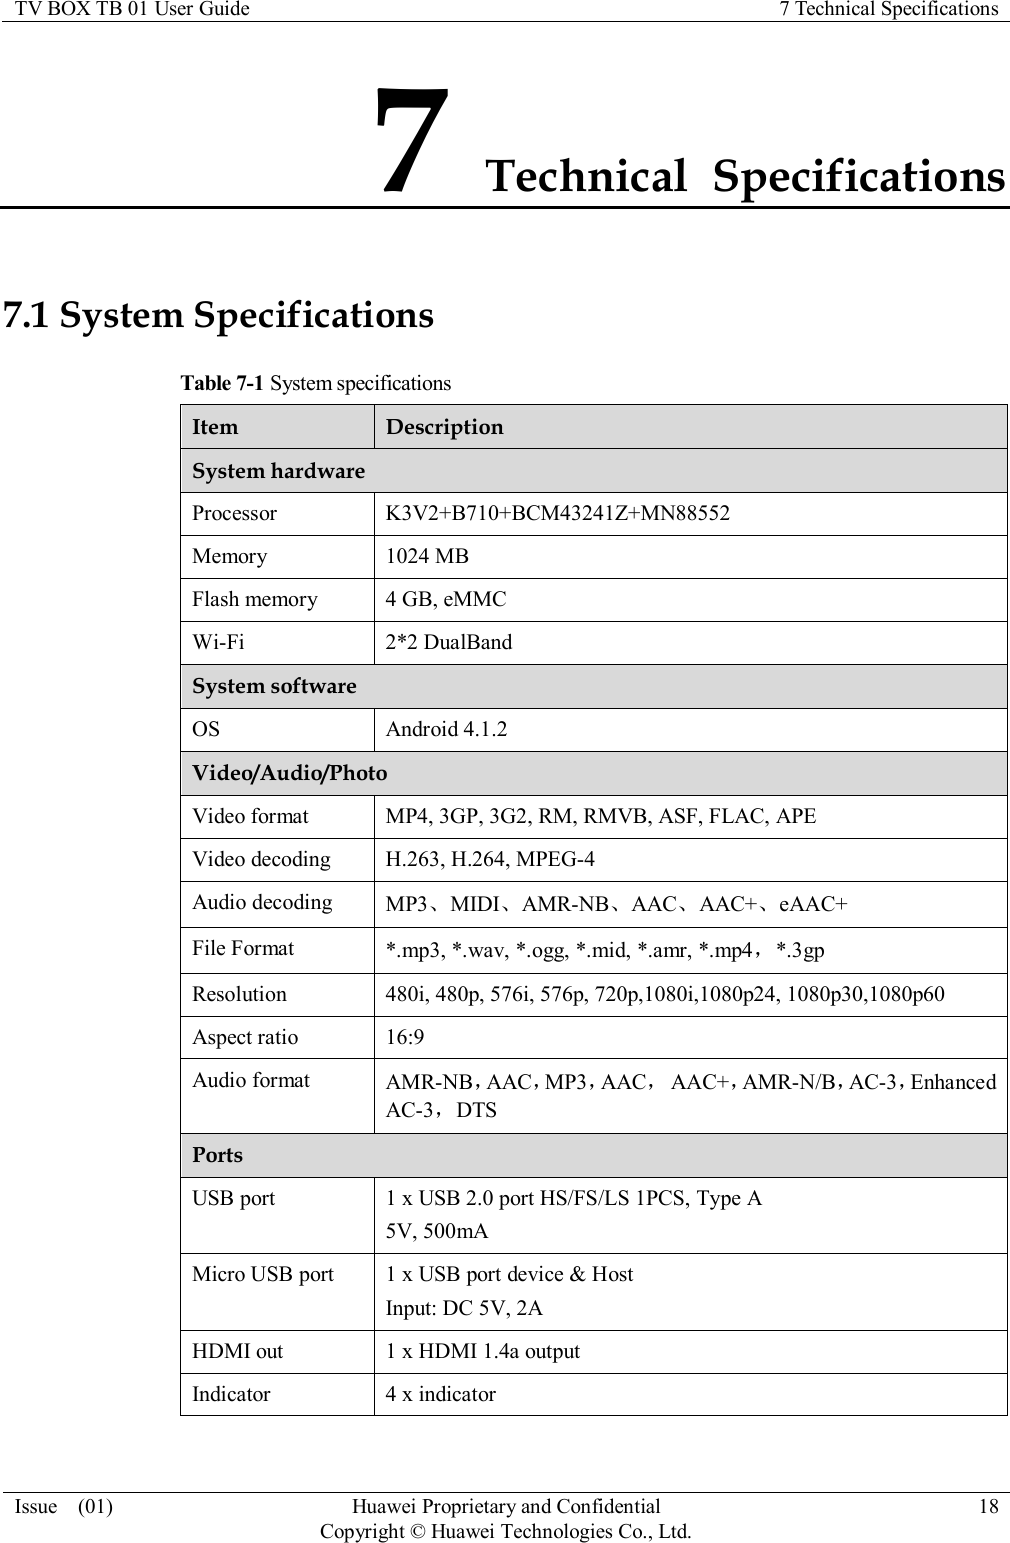 TV BOX TB 01 User Guide 7 Technical Specifications  Issue    (01) Huawei Proprietary and Confidential                                     Copyright © Huawei Technologies Co., Ltd. 18  7 Technical  Specifications 7.1 System Specifications Table 7-1 System specifications Item Description System hardware Processor K3V2+B710+BCM43241Z+MN88552 Memory 1024 MB Flash memory 4 GB, eMMC Wi-Fi 2*2 DualBand System software OS Android 4.1.2 Video/Audio/Photo Video format MP4, 3GP, 3G2, RM, RMVB, ASF, FLAC, APE Video decoding H.263, H.264, MPEG-4 Audio decoding MP3、MIDI、AMR-NB、AAC、AAC+、eAAC+ File Format *.mp3, *.wav, *.ogg, *.mid, *.amr, *.mp4，*.3gp Resolution 480i, 480p, 576i, 576p, 720p,1080i,1080p24, 1080p30,1080p60 Aspect ratio 16:9 Audio format AMR-NB，AAC，MP3，AAC，  AAC+，AMR-N/B，AC-3，Enhanced AC-3，DTS Ports USB port 1 x USB 2.0 port HS/FS/LS 1PCS, Type A 5V, 500mA Micro USB port 1 x USB port device &amp; Host Input: DC 5V, 2A HDMI out 1 x HDMI 1.4a output Indicator 4 x indicator 